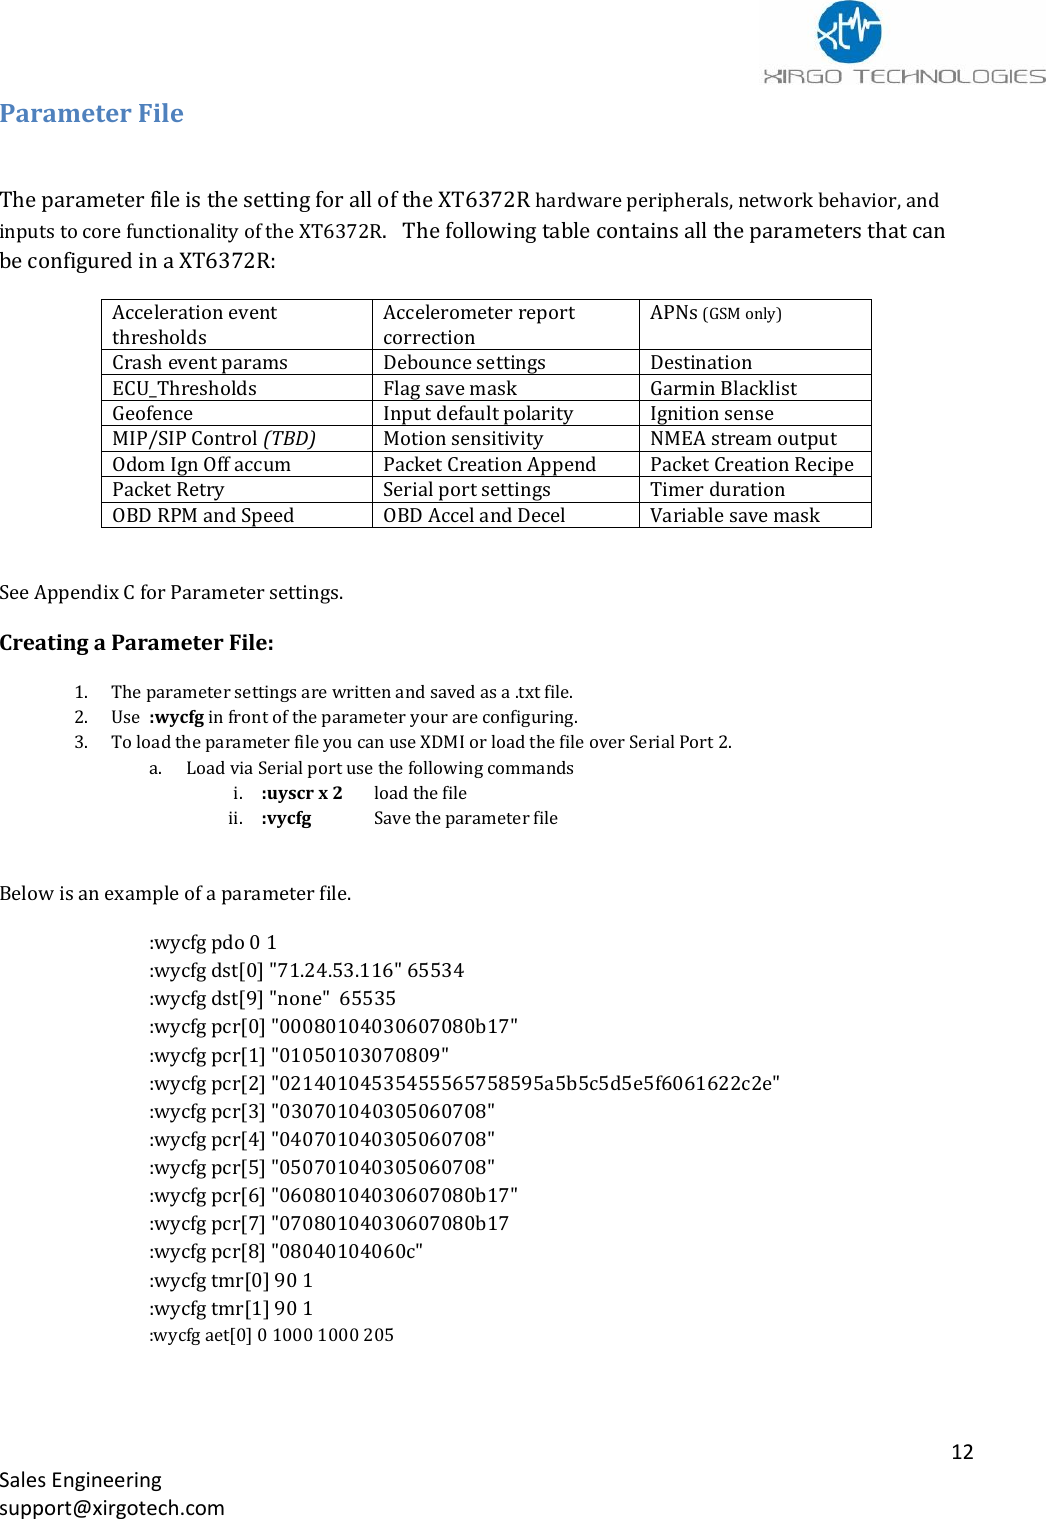   12 Sales Engineering support@xirgotech.com Parameter File  The parameter file is the setting for all of the XT6372R hardware peripherals, network behavior, and inputs to core functionality of the XT6372R.   The following table contains all the parameters that can be configured in a XT6372R: Acceleration event thresholds Accelerometer report correction APNs (GSM only) Crash event params Debounce settings Destination ECU_Thresholds Flag save mask Garmin Blacklist Geofence Input default polarity Ignition sense MIP/SIP Control (TBD) Motion sensitivity NMEA stream output Odom Ign Off accum Packet Creation Append Packet Creation Recipe Packet Retry Serial port settings Timer duration OBD RPM and Speed OBD Accel and Decel Variable save mask  See Appendix C for Parameter settings. Creating a Parameter File: 1. The parameter settings are written and saved as a .txt file. 2. Use  :wycfg in front of the parameter your are configuring. 3. To load the parameter file you can use XDMI or load the file over Serial Port 2. a. Load via Serial port use the following commands i. :uyscr x 2     load the file   ii. :vycfg    Save the parameter file  Below is an example of a parameter file.   :wycfg pdo 0 1 :wycfg dst[0] &quot;71.24.53.116&quot; 65534 :wycfg dst[9] &quot;none&quot;  65535 :wycfg pcr[0] &quot;00080104030607080b17&quot; :wycfg pcr[1] &quot;01050103070809&quot; :wycfg pcr[2] &quot;02140104535455565758595a5b5c5d5e5f6061622c2e&quot; :wycfg pcr[3] &quot;030701040305060708&quot; :wycfg pcr[4] &quot;040701040305060708&quot; :wycfg pcr[5] &quot;050701040305060708&quot; :wycfg pcr[6] &quot;06080104030607080b17&quot; :wycfg pcr[7] &quot;07080104030607080b17 :wycfg pcr[8] &quot;08040104060c&quot; :wycfg tmr[0] 90 1 :wycfg tmr[1] 90 1 :wycfg aet[0] 0 1000 1000 205 